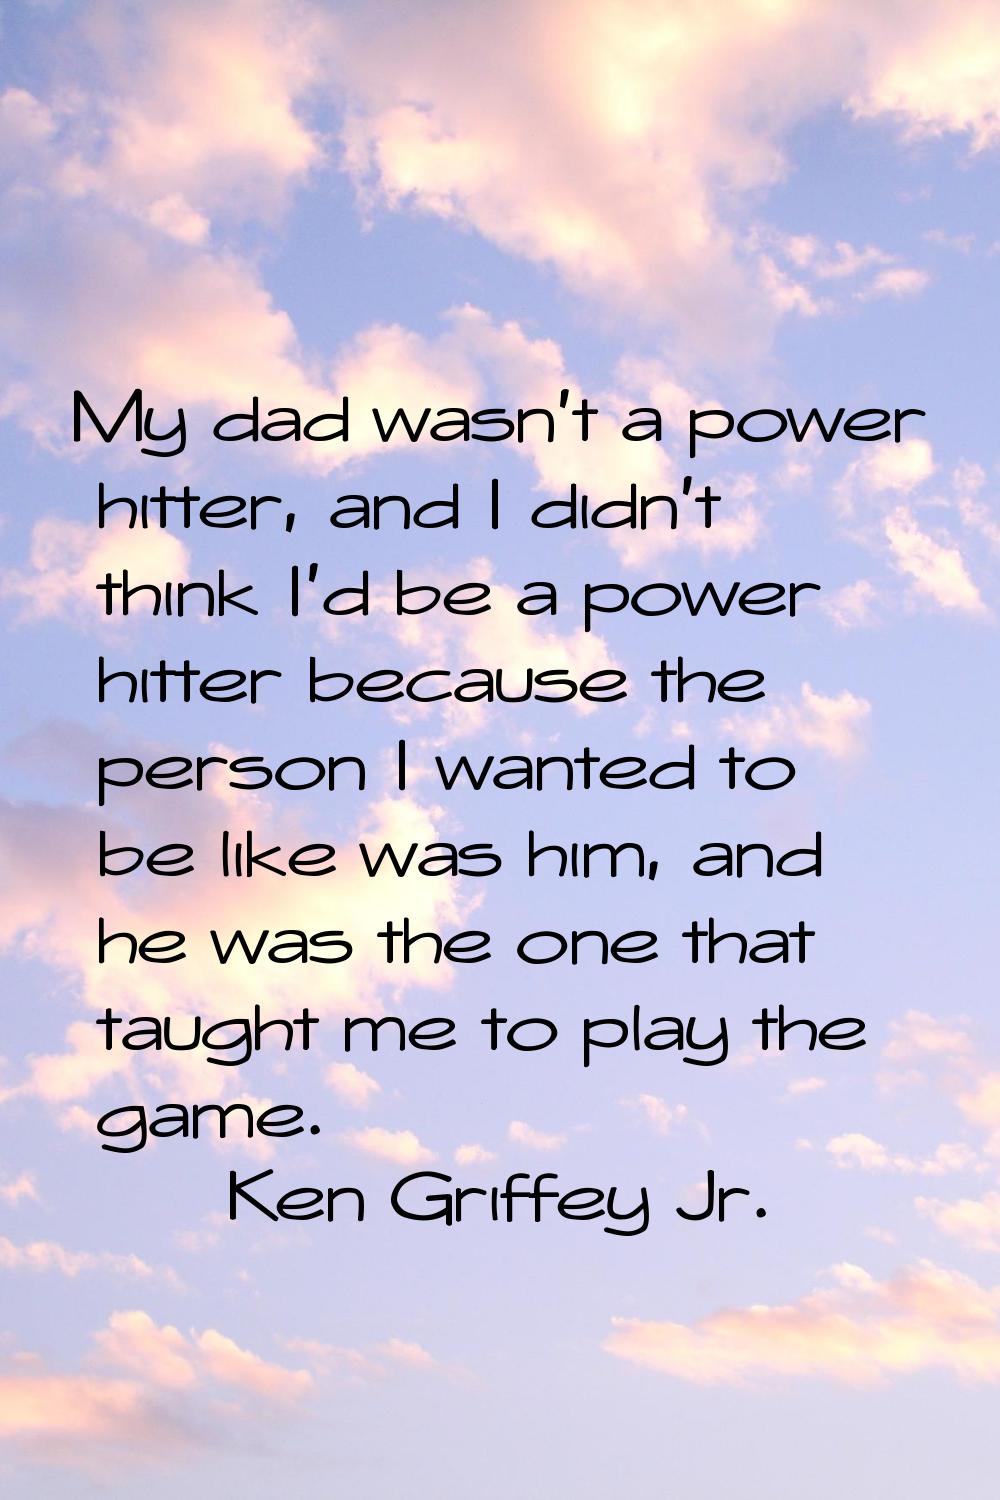 My dad wasn't a power hitter, and I didn't think I'd be a power hitter because the person I wanted 